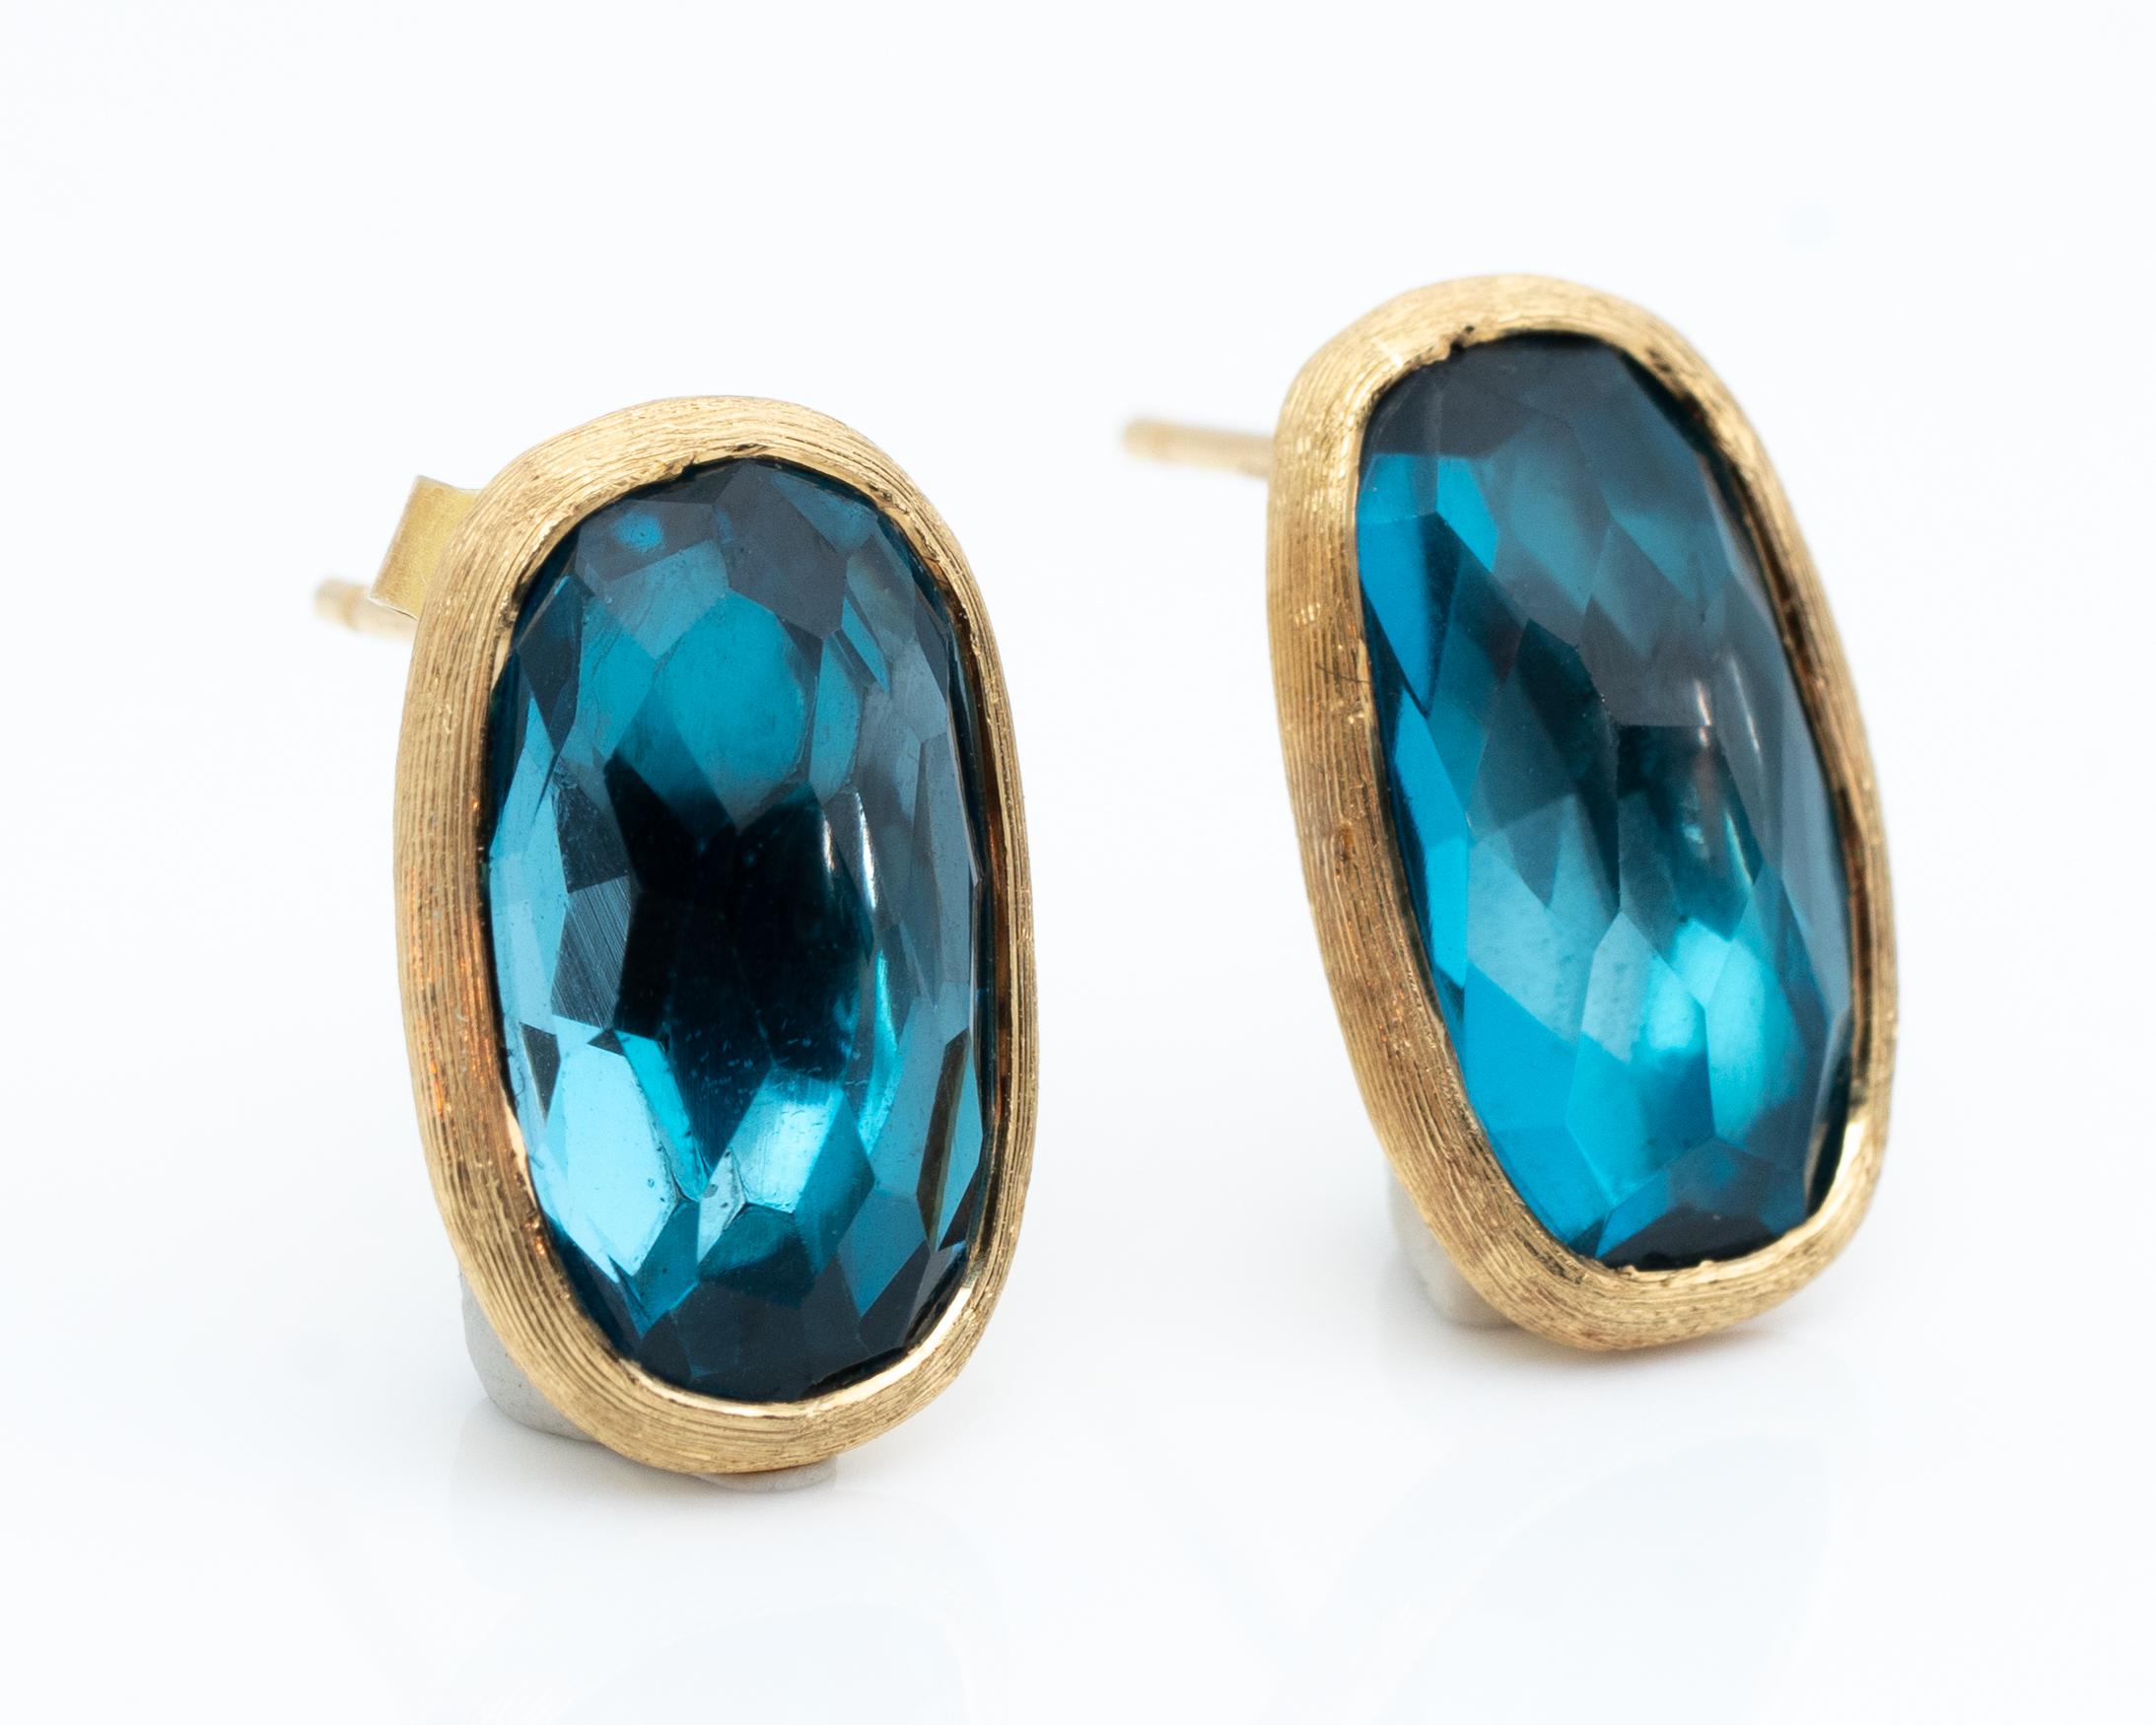 Feature:
Blue Topaz with visible facets, elongated oval shape 
Circa 1990s, Made in Italy
Push Back Earrings
Iconic Designer Marco Bicego

Item Details:
Metal Type: 18 Karat Yellow Gold
Weight: 4.13 grams 
Measures: 15 millimeter x 10 millimeter 
